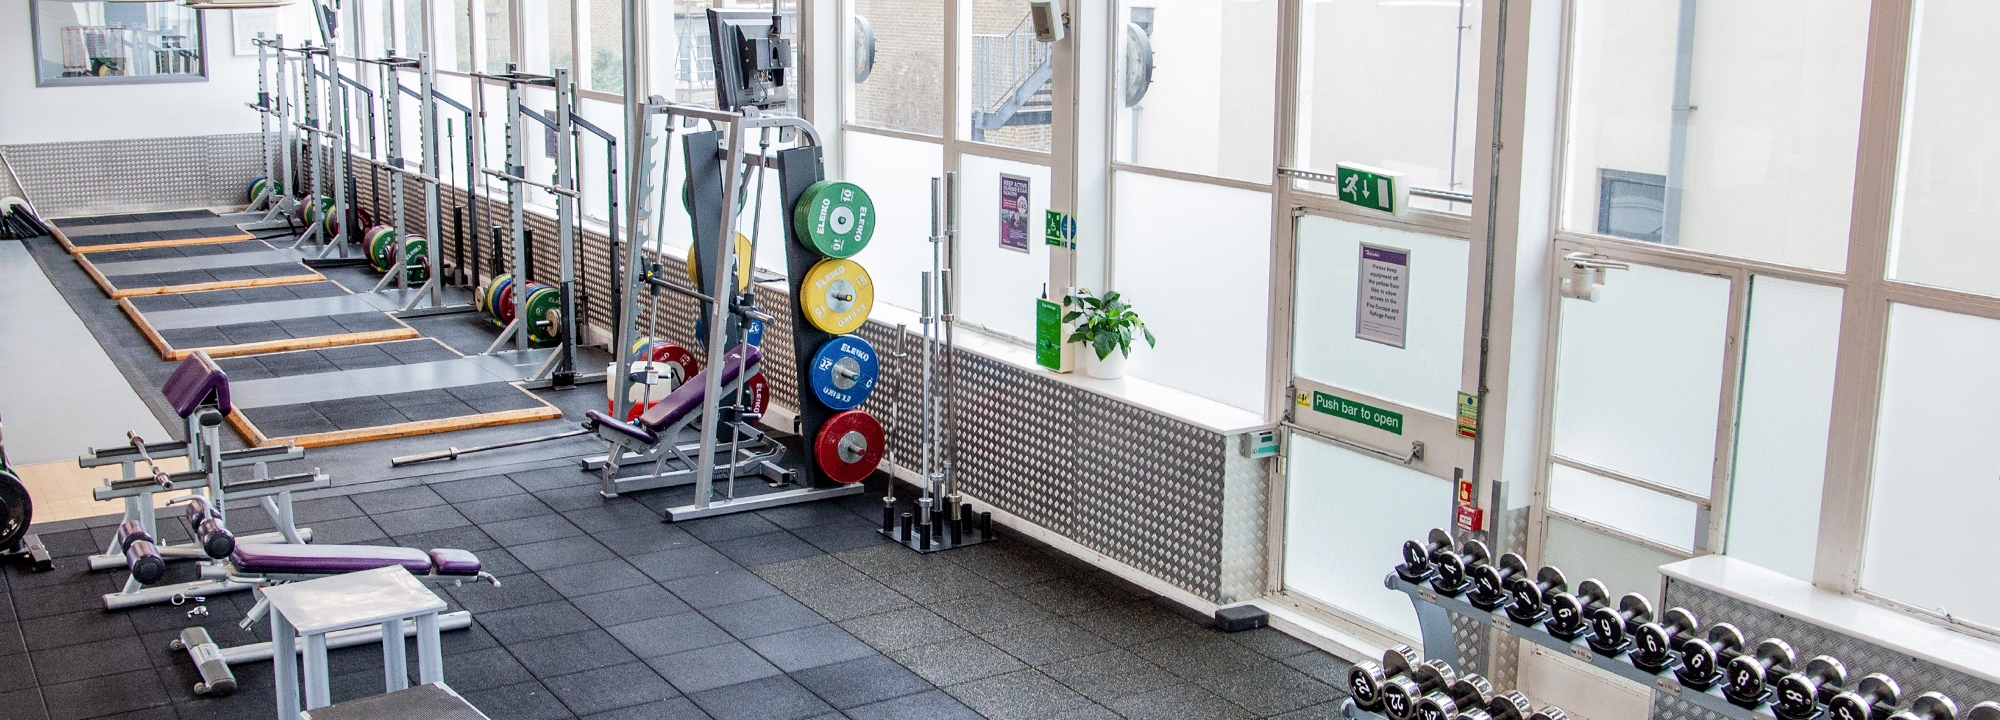 Qmotion is the Students' Union run Sport &amp; Fitness Centre, located on the Mile End campus. We provide students, staff, and members of the community with great facilities in a safe and welcoming environment.